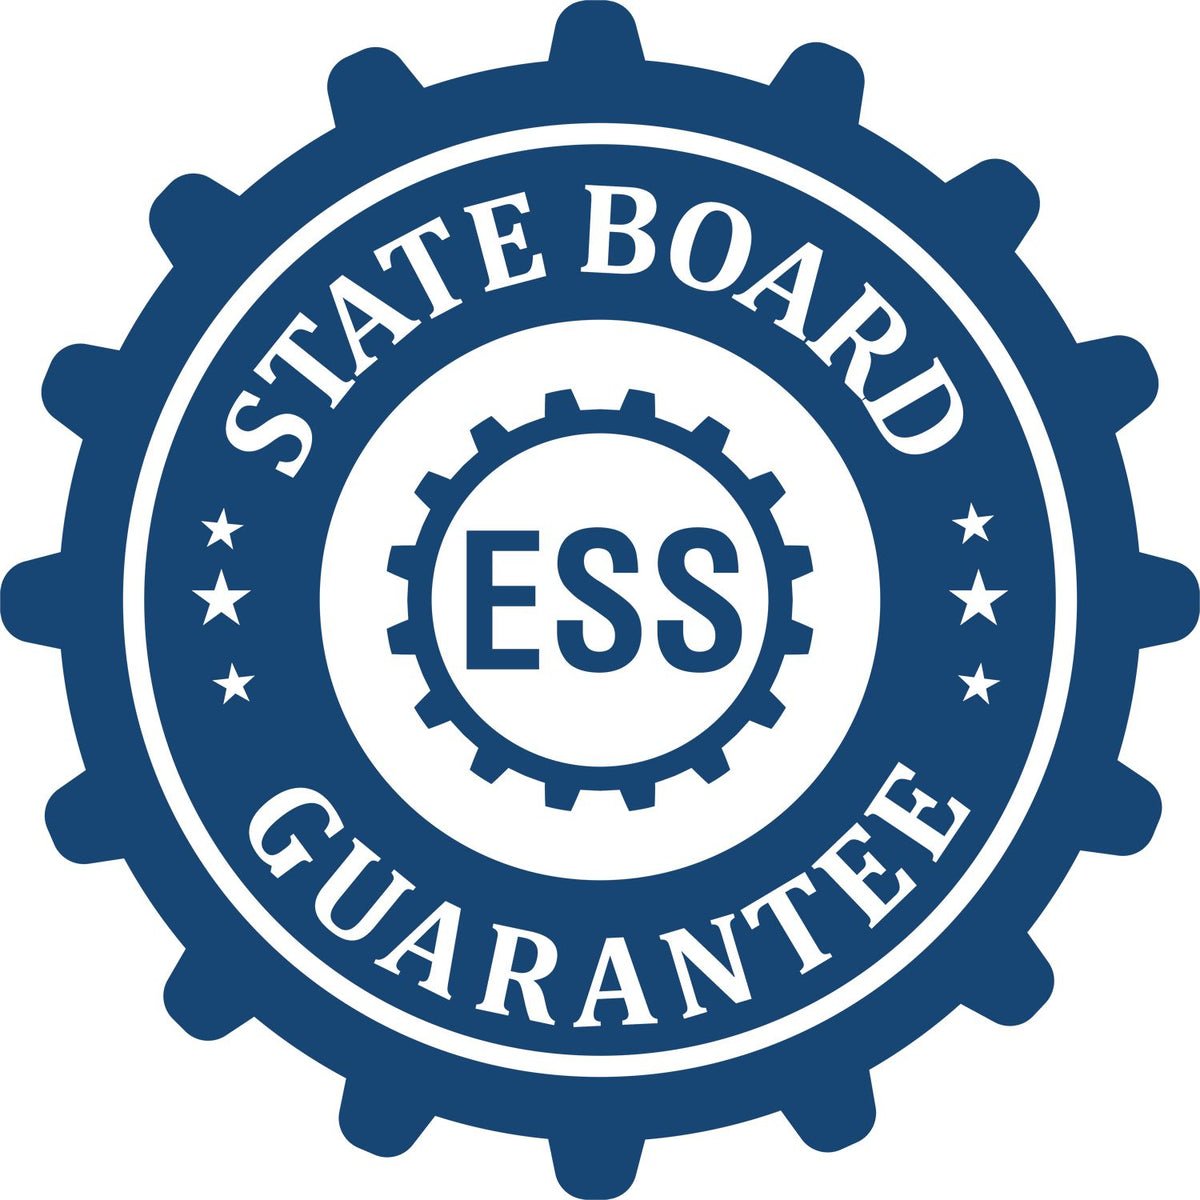 An emblem in a gear shape illustrating a state board guarantee for the Digital Pennsylvania Geologist Stamp, Electronic Seal for Pennsylvania Geologist